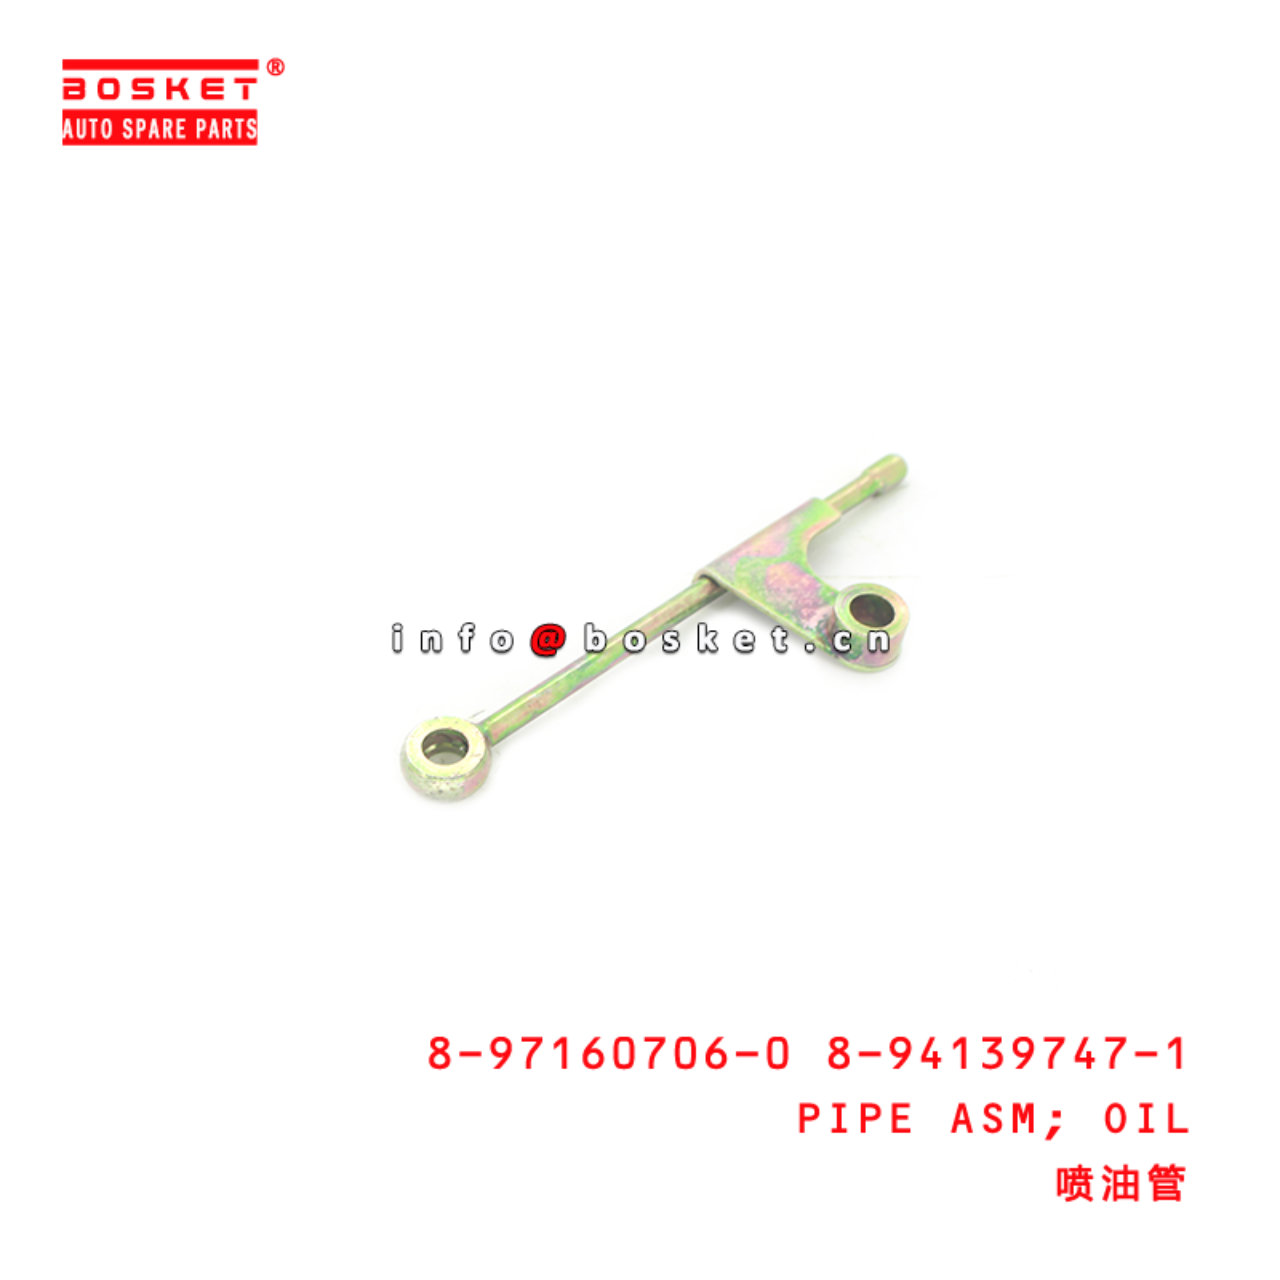 8-97160706-0 8-94139747-1 Oil Pipe Assembly 8971607060 8941397471 Suitable for ISUZU NKR55 4JB1